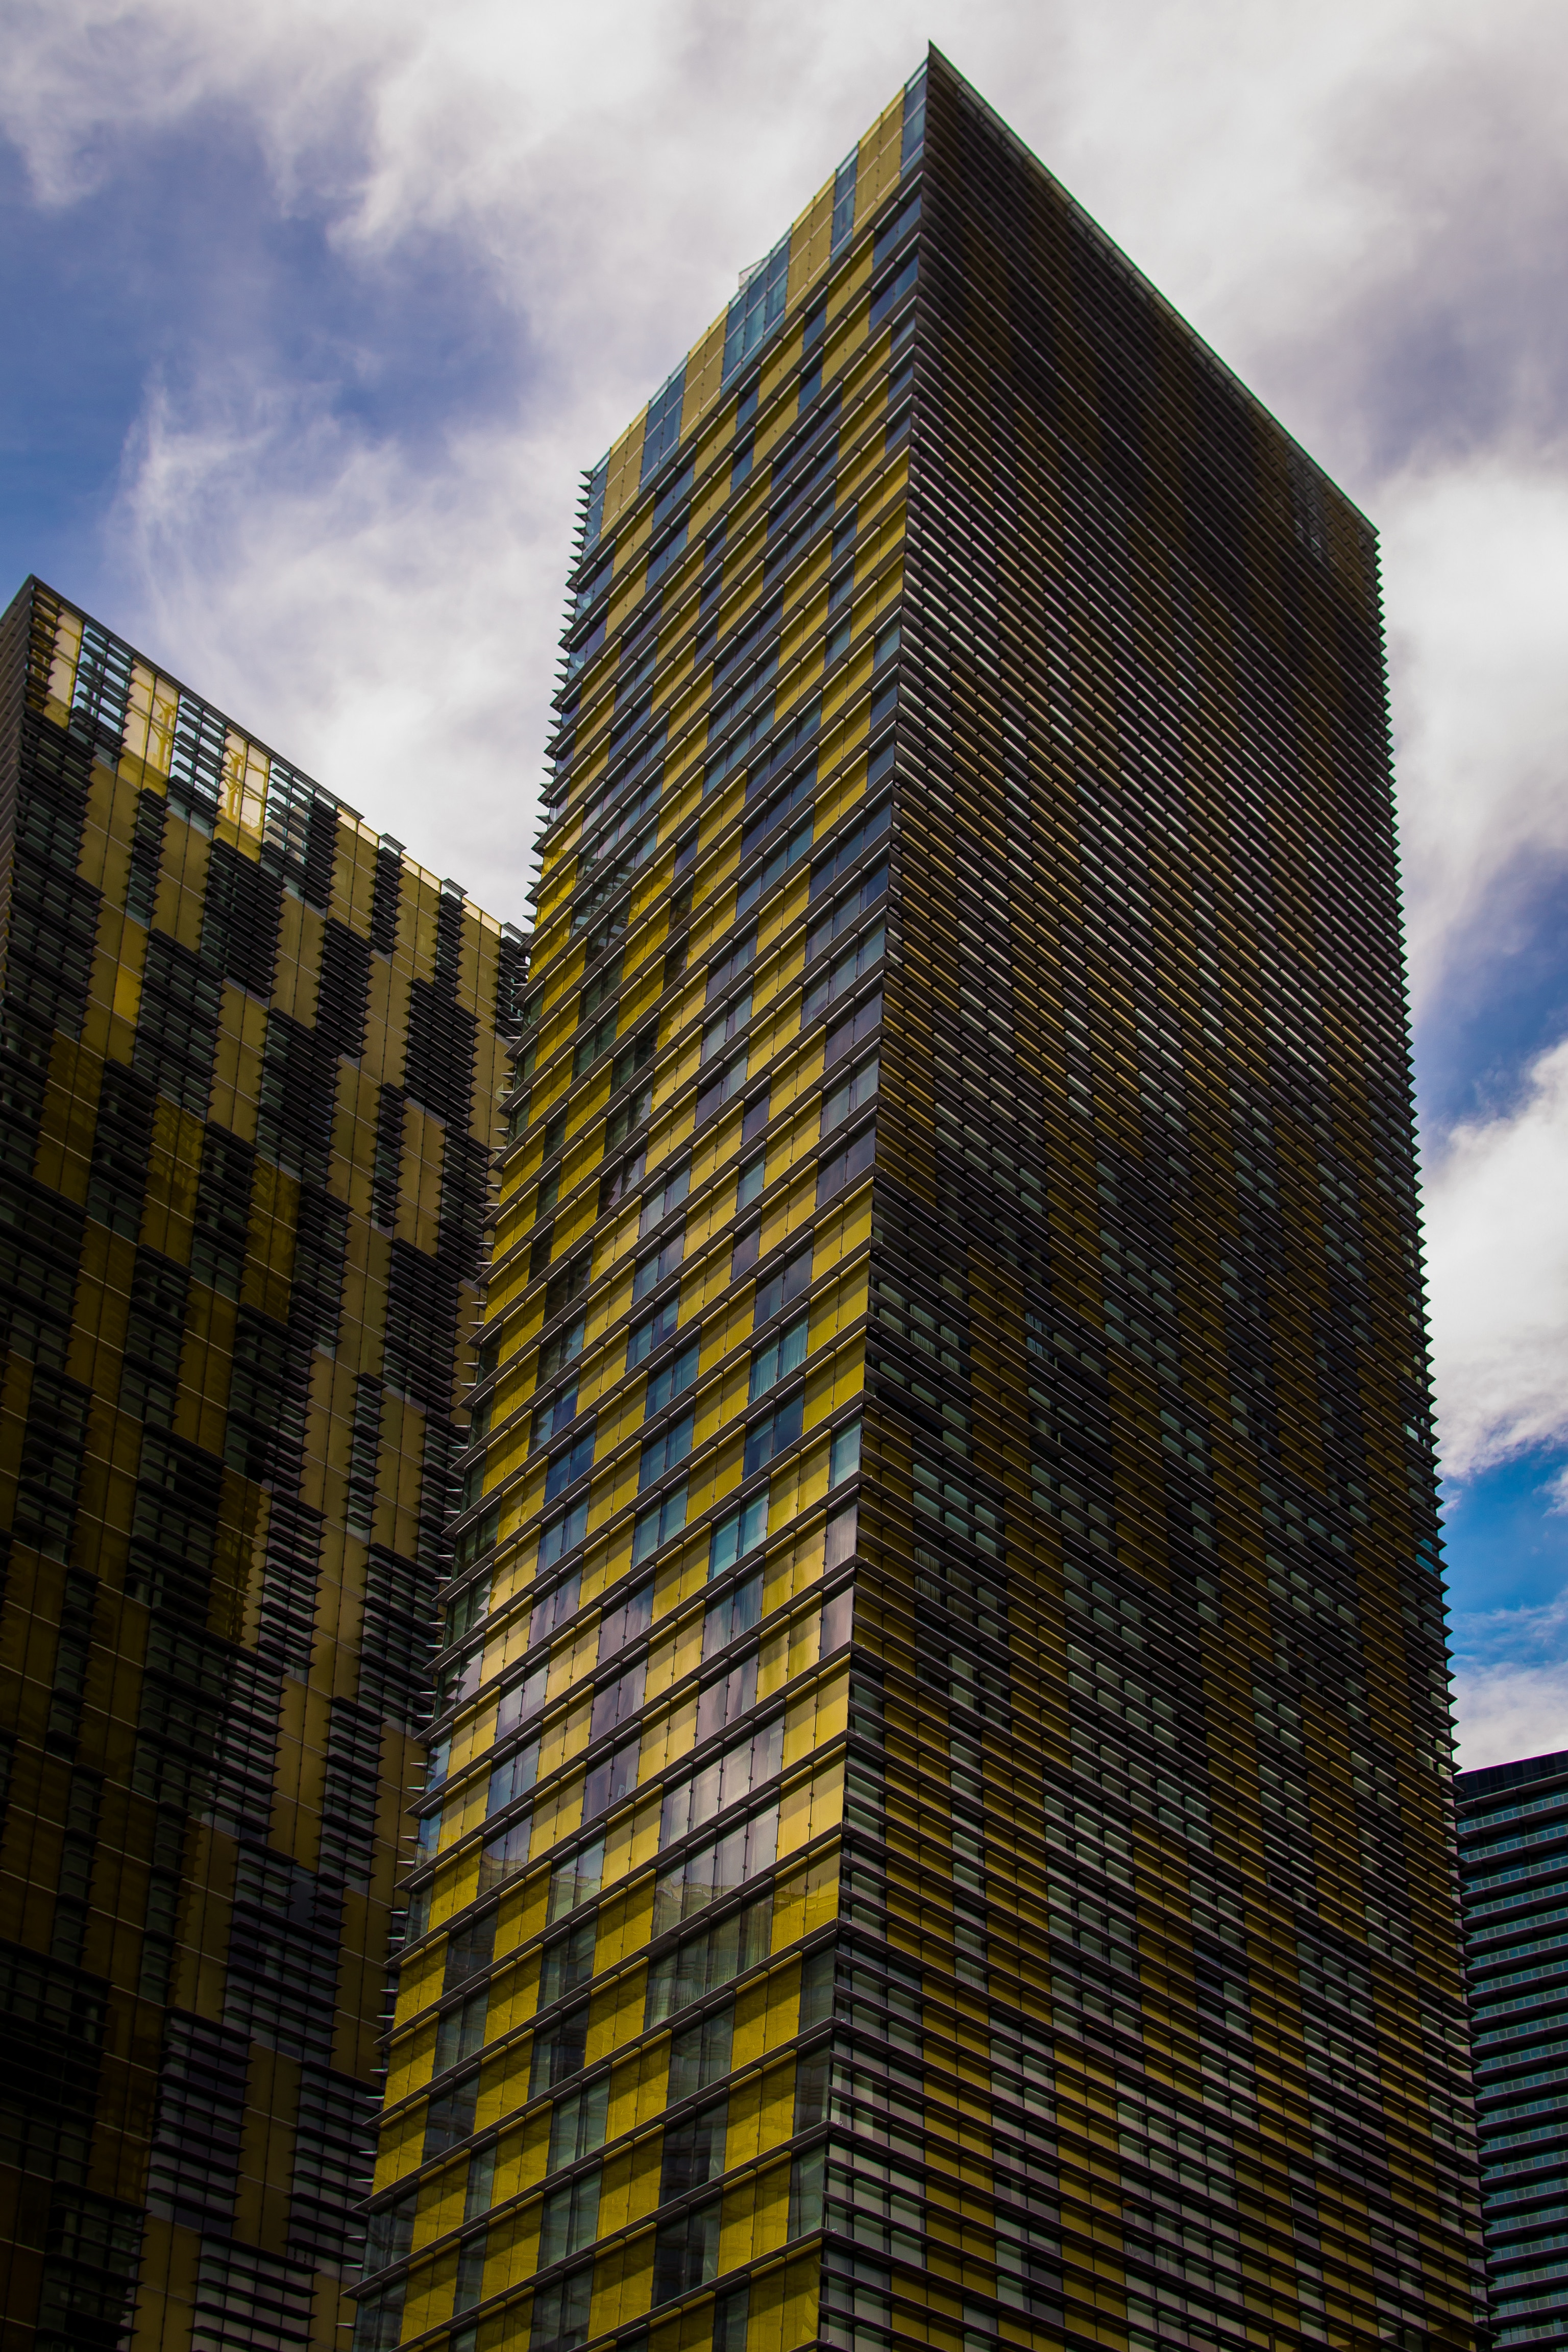 low angle photography of yellow and blue glass curtain high rise buildings at daytime